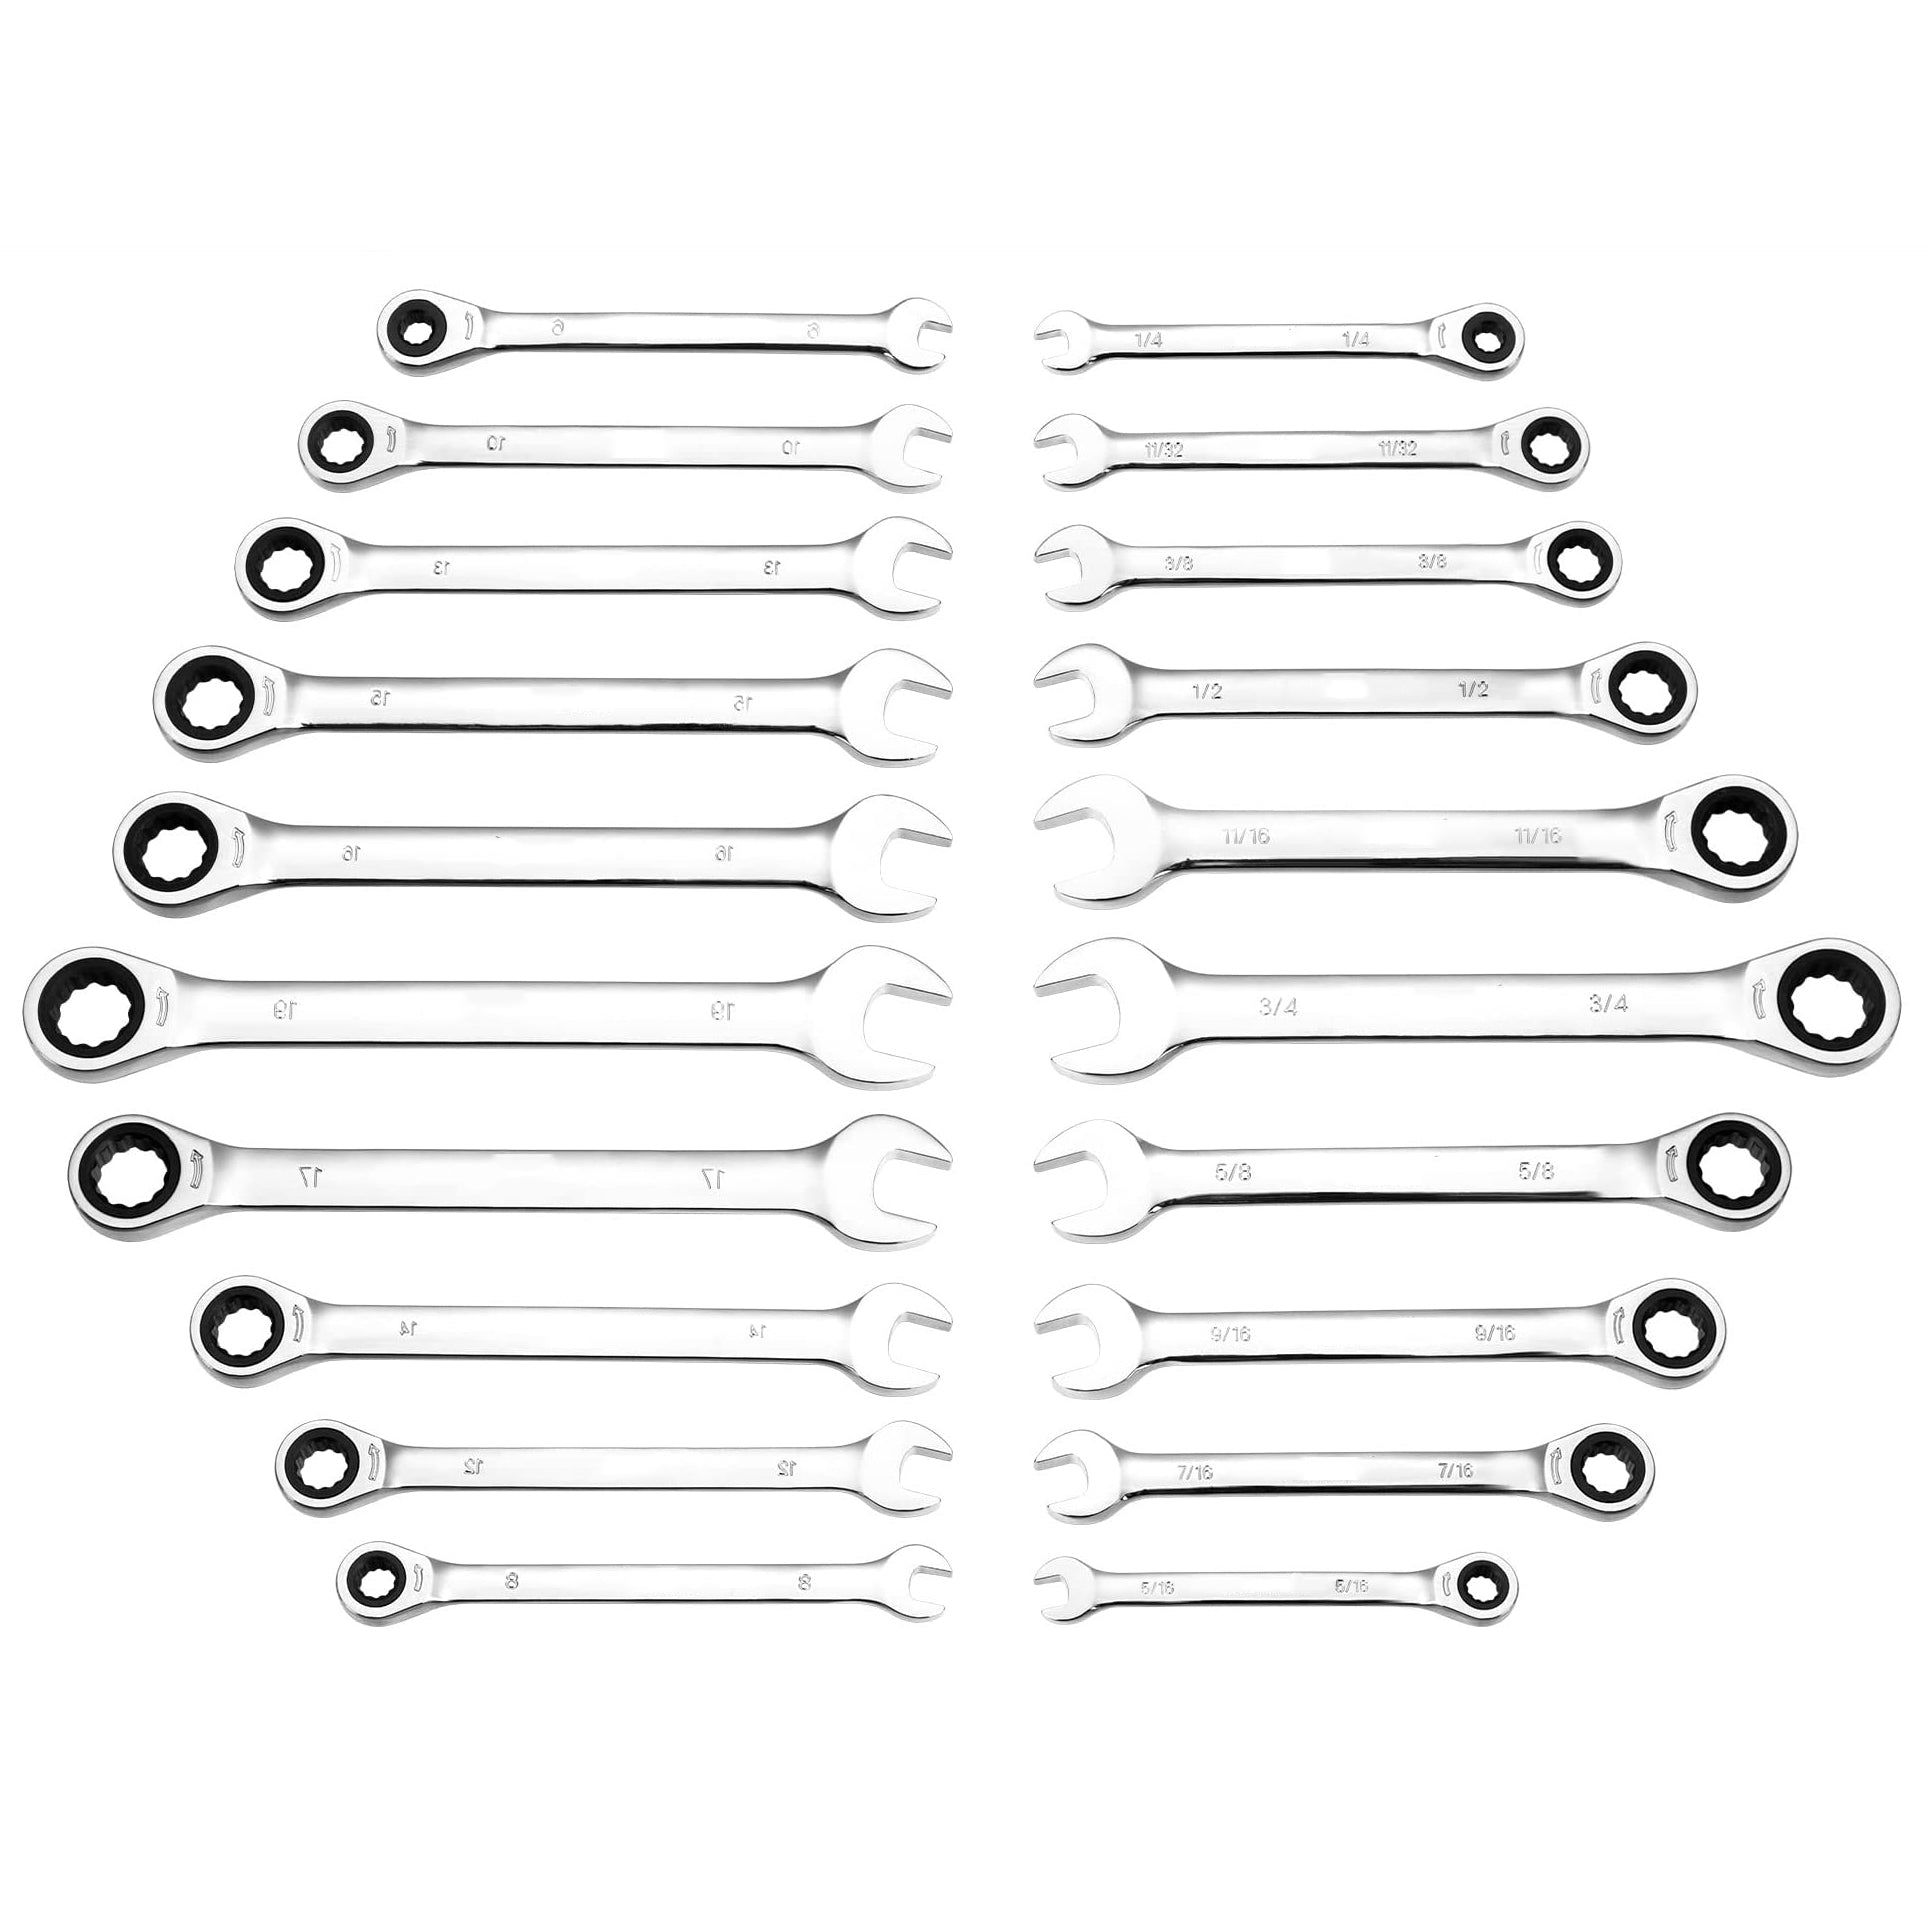 GARVEE TOWALLMARK 20-Piece SAE Metric Ratcheting Combination Wrench Set Ratchet Wrenches Set